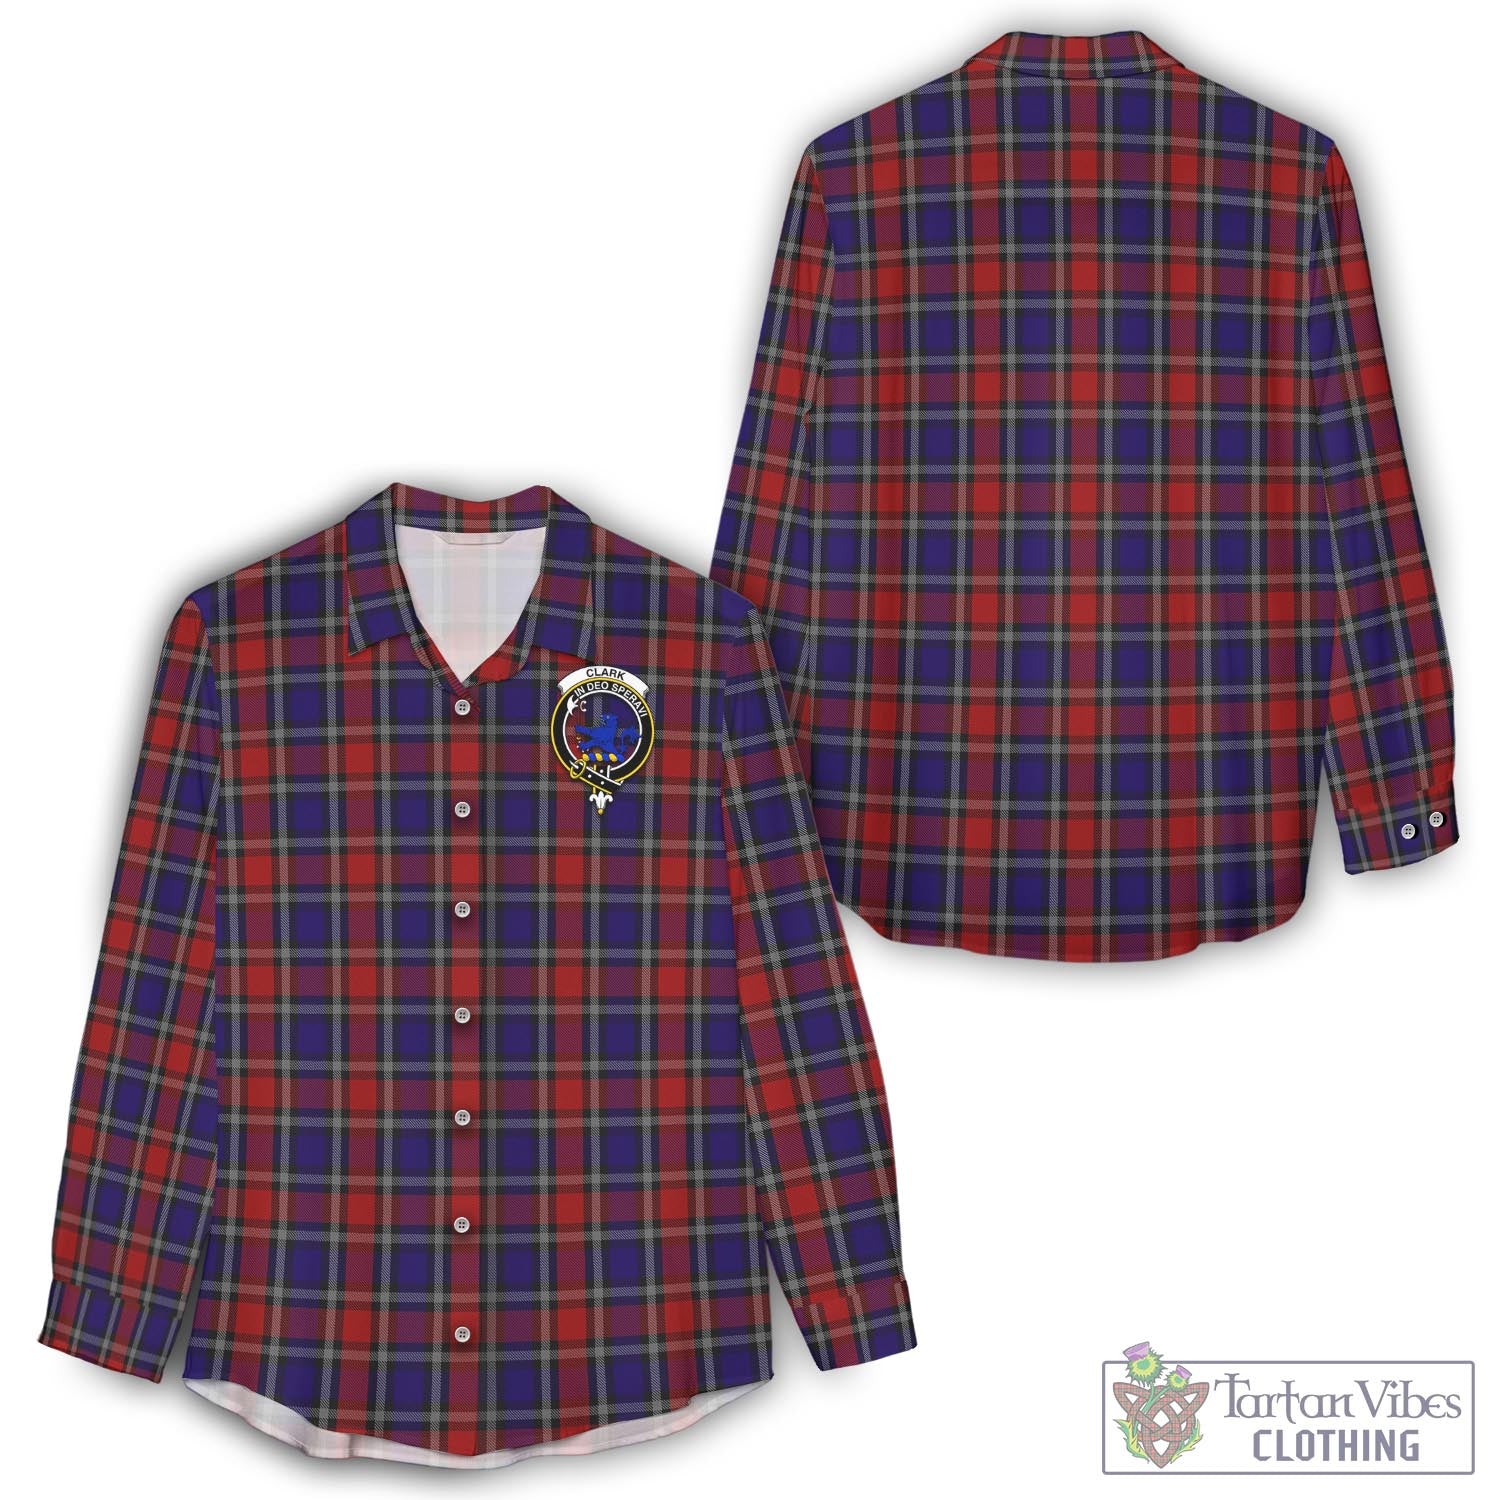 Tartan Vibes Clothing Clark (Lion) Red Tartan Womens Casual Shirt with Family Crest